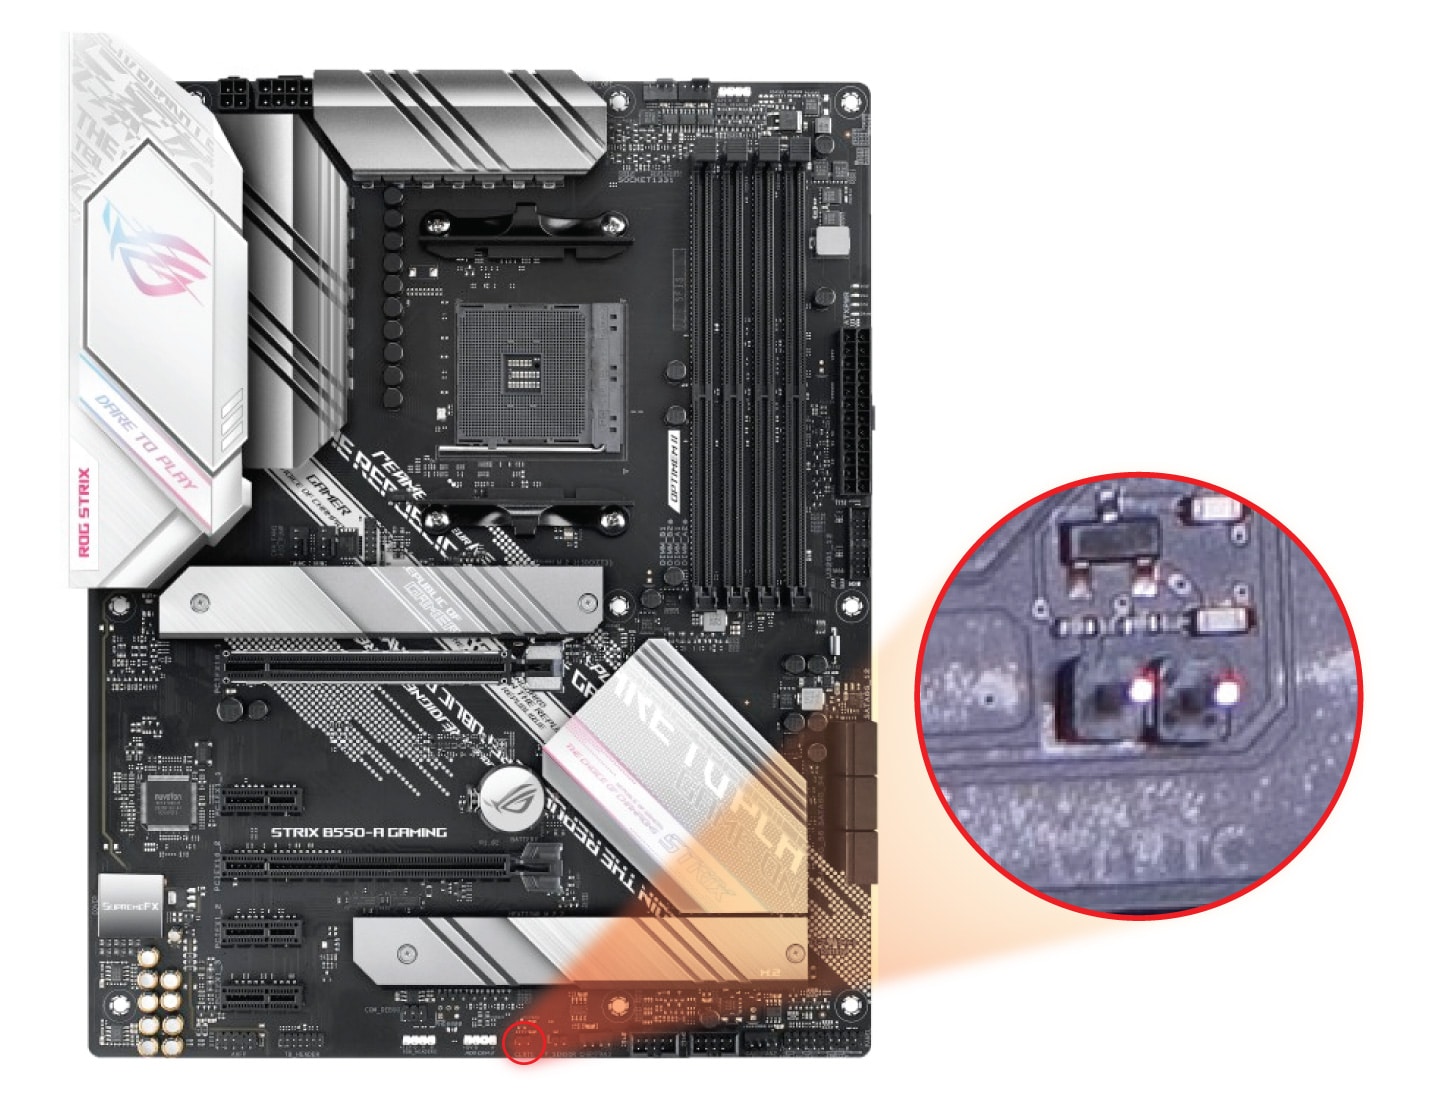 Showing CMOS Jumper location on ASUS ROG STRIX B550-A GAMING motherboard.